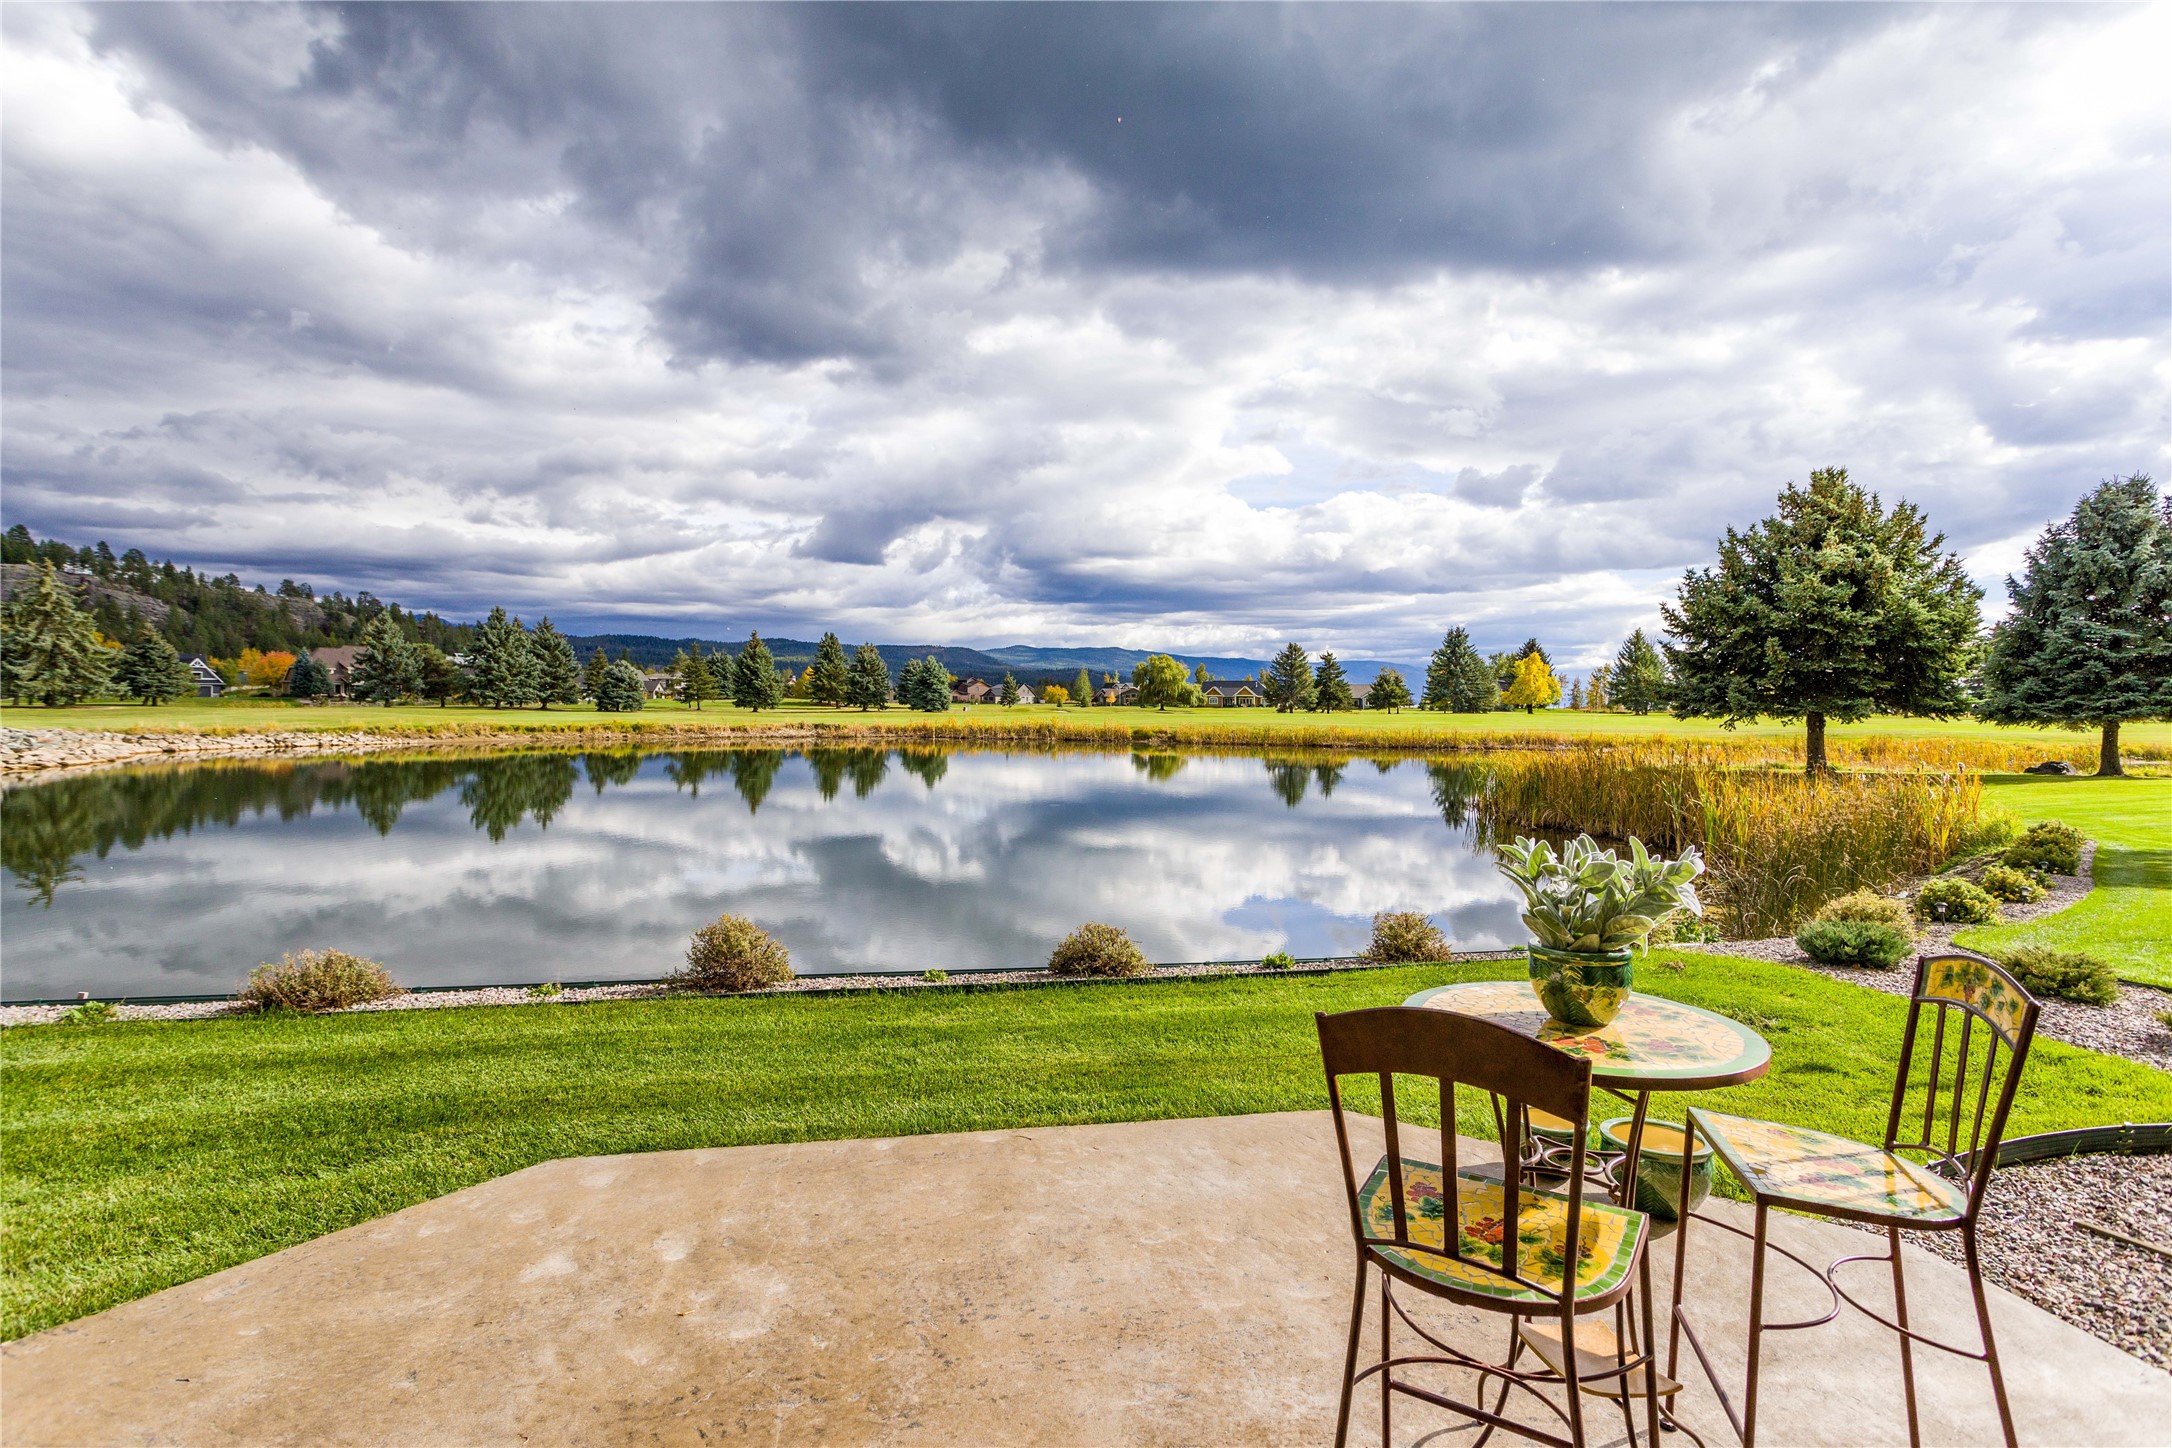 A wonderful two-story townhome overlooking the pond & the 8th fairway on the Osprey 9 at the Eagle Bend golf course. The patio & guest room balcony capture the views of the Mission Mountains to the southeast & Flathead Lake to the south. The spacious kitchen connects to the dining room, which opens to the comfortable living room with a cozy corner fireplace & expansive sliding doors to the patio bordering the pond. The main floor consists of the primary suite with soaking tub, separate shower & walk-in closet; the laundry room is connected to the over-sized double garage & convenient to the adjoining powder room. The upper level features two guest suites, one with a viewing balcony & the other with a huge storage closet, separated by the loft office. The residence is located only minutes from the Eagle Bend clubhouse, the Eagle Bend Yacht Harbor, the Montana Athletic Club & the quaint village of Bigfork. Glacier International Airport & Glacier National Park are within an hour away.